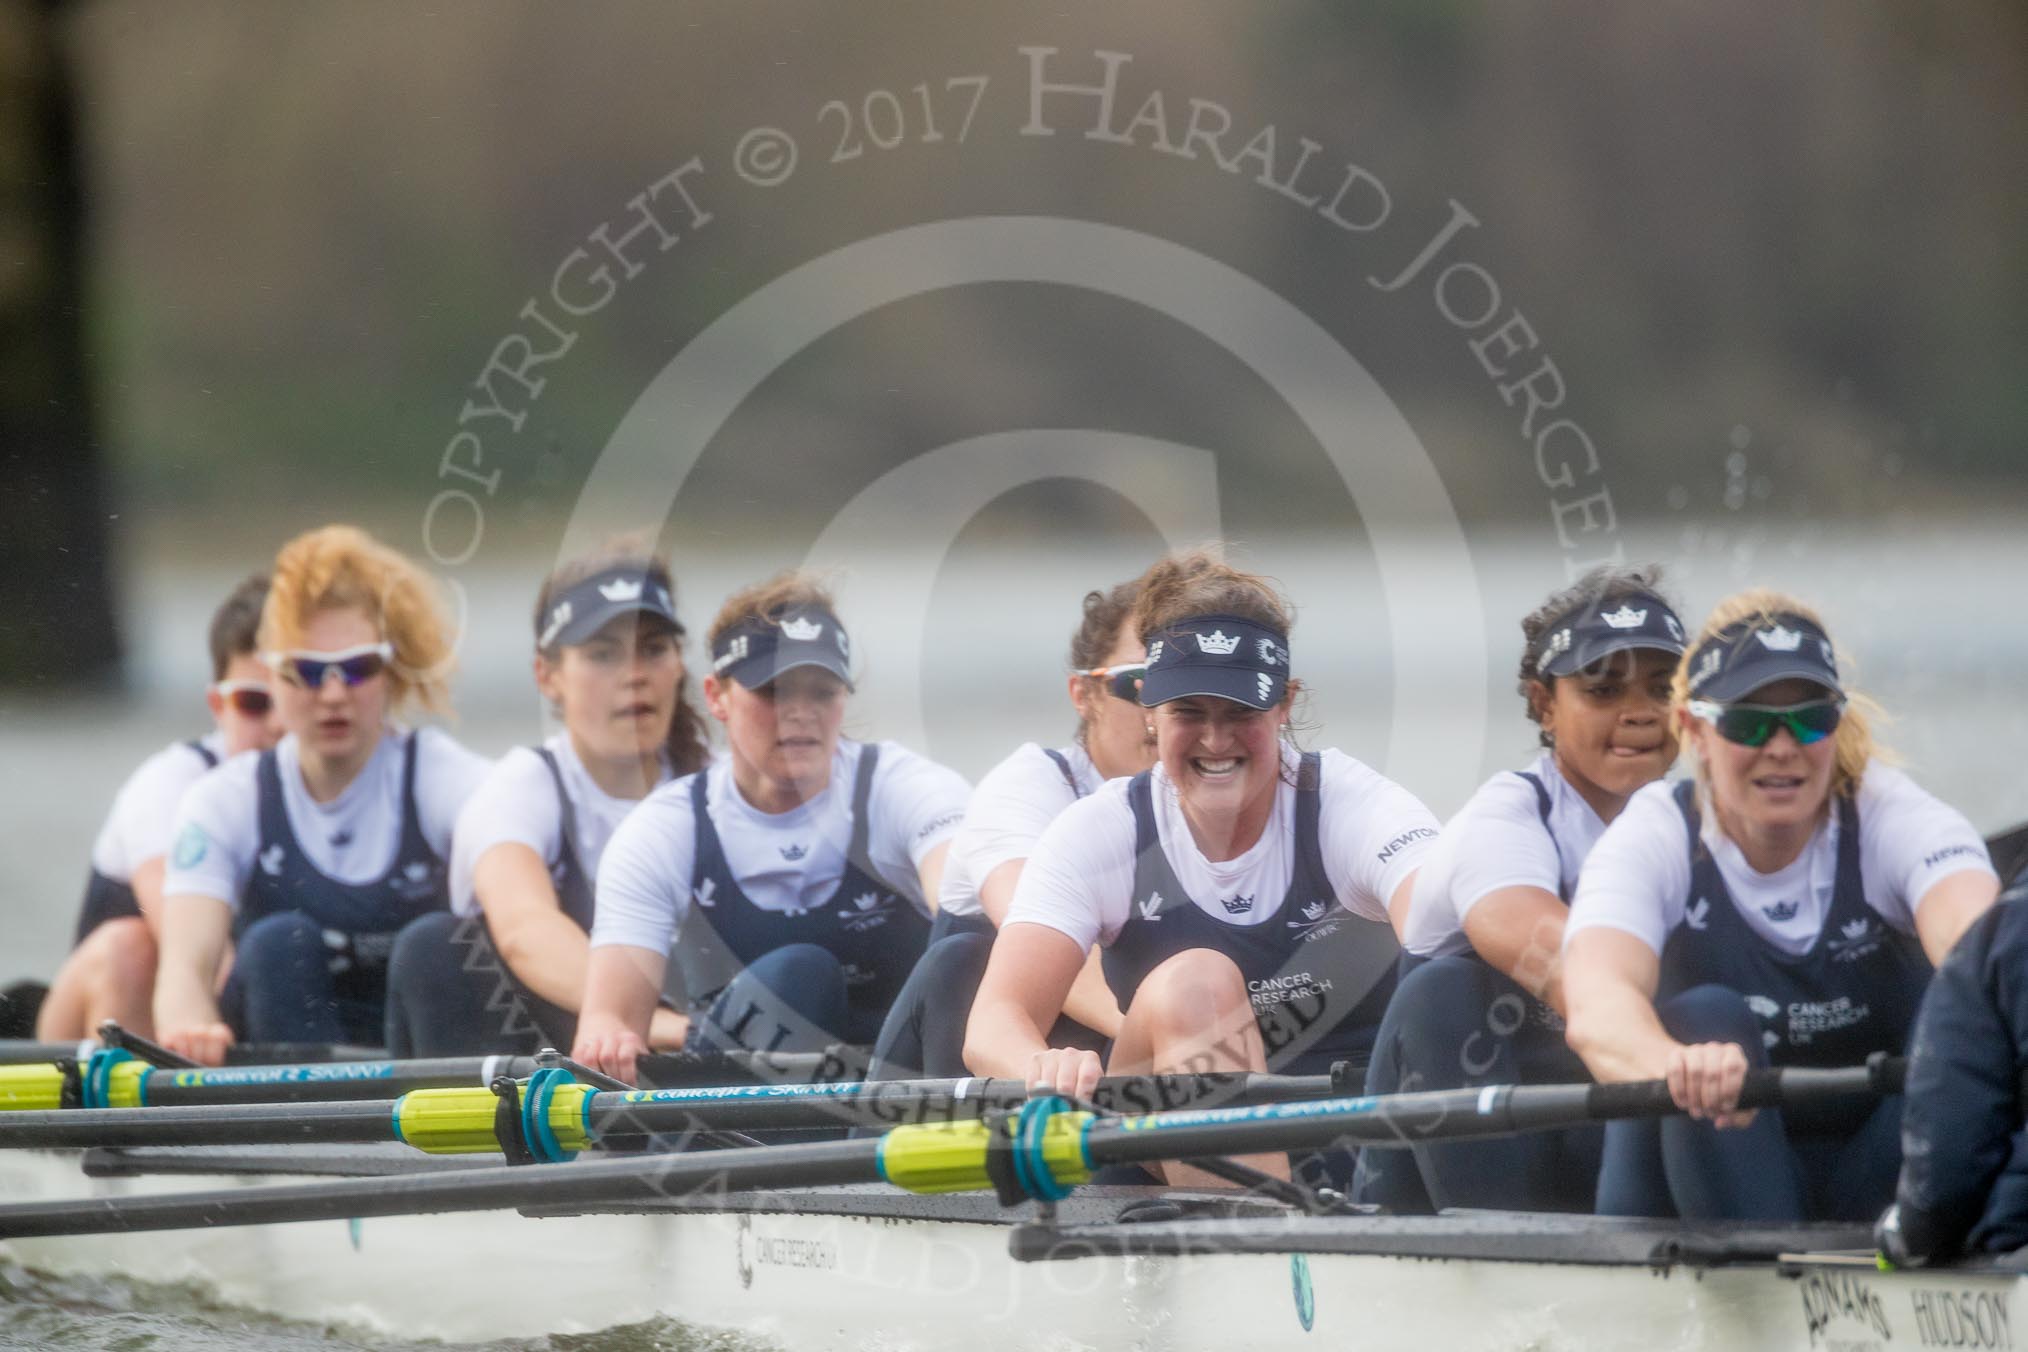 The Cancer Research UK Boat Race season 2017 - Women's Boat Race Fixture OUWBC vs Molesey BC: At the finish line of the second part of the fixture, in the OUWBC boat bow Alice Roberts, 2 Beth Bridgman, 3 Rebecca Te Water Naude, 4 Rebecca Esselstein, 5 Chloe Laverack, 6 Harriet Austin, 7 Jenna Hebert, stroke Emily Cameron, cox Eleanor Shearer.
River Thames between Putney Bridge and Mortlake,
London SW15,

United Kingdom,
on 19 March 2017 at 16:25, image #163